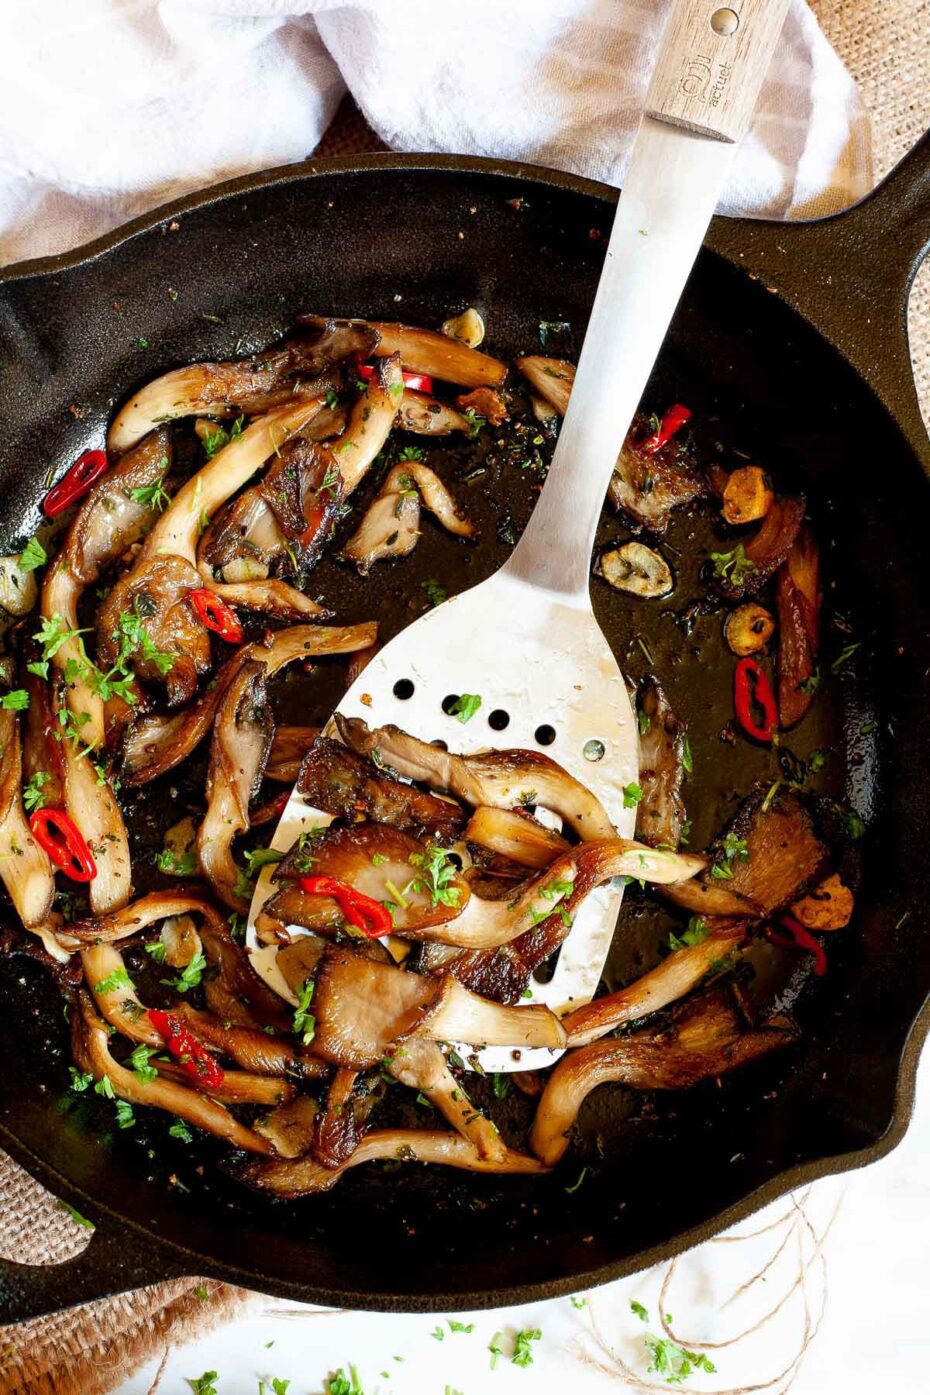 Black cast iron skillet from above with crispy brown oyster mushroom, sliced red pepper, garlic slices and chopped fresh green herbs. A silver slotted turner is taking a serving.